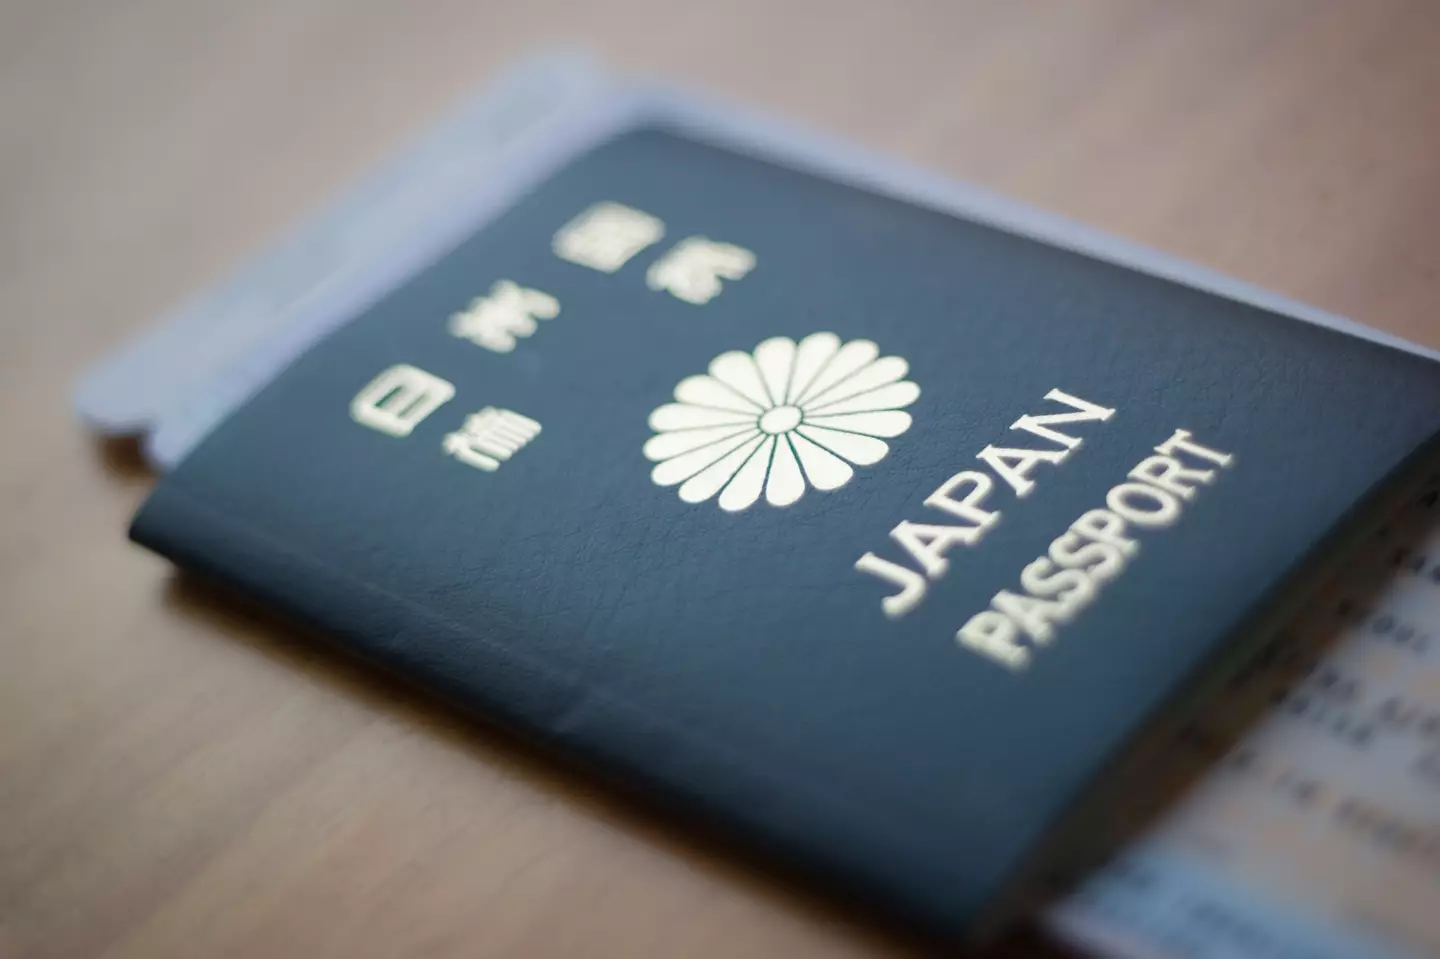 The Japanese passport is top dog when it comes to power.